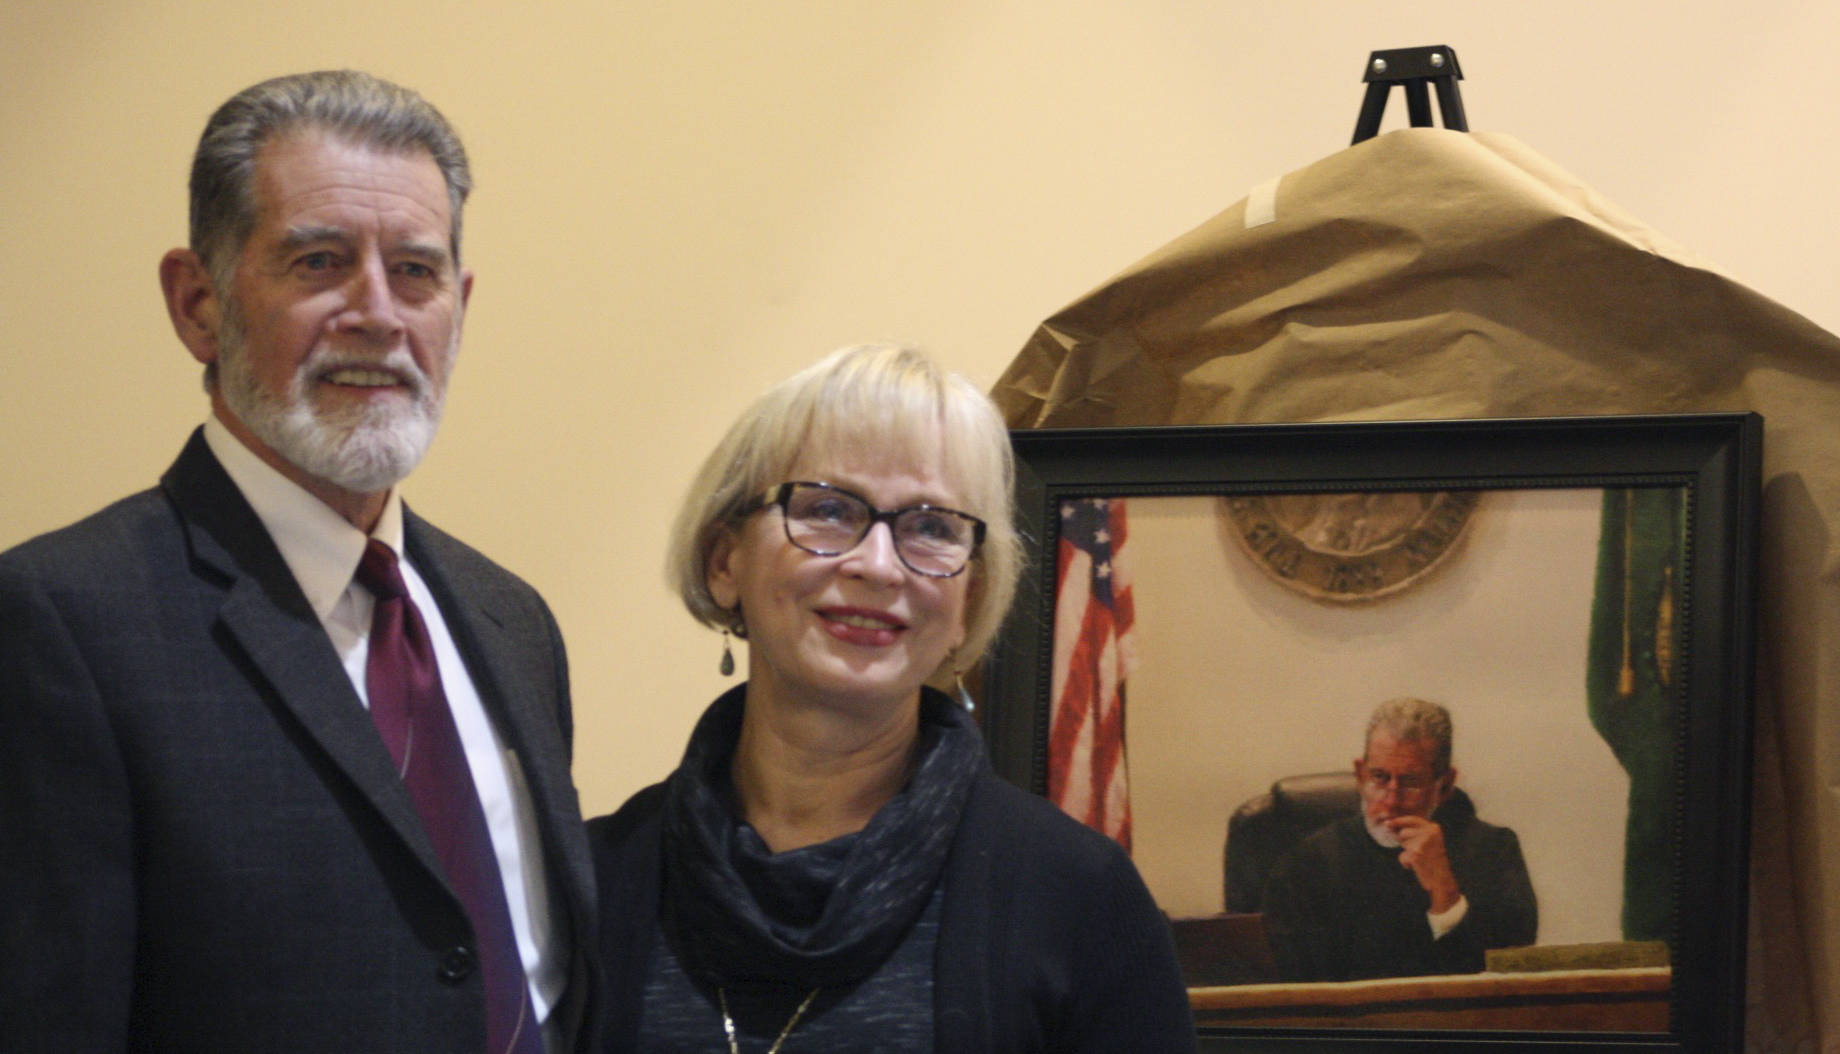 Staff photo/Hayley Day                                San Juan County Superior Court Judge Donald Eaton and his wife Sheryl smile in front of a portrait painted by Barnaby Zall, a local attorney.